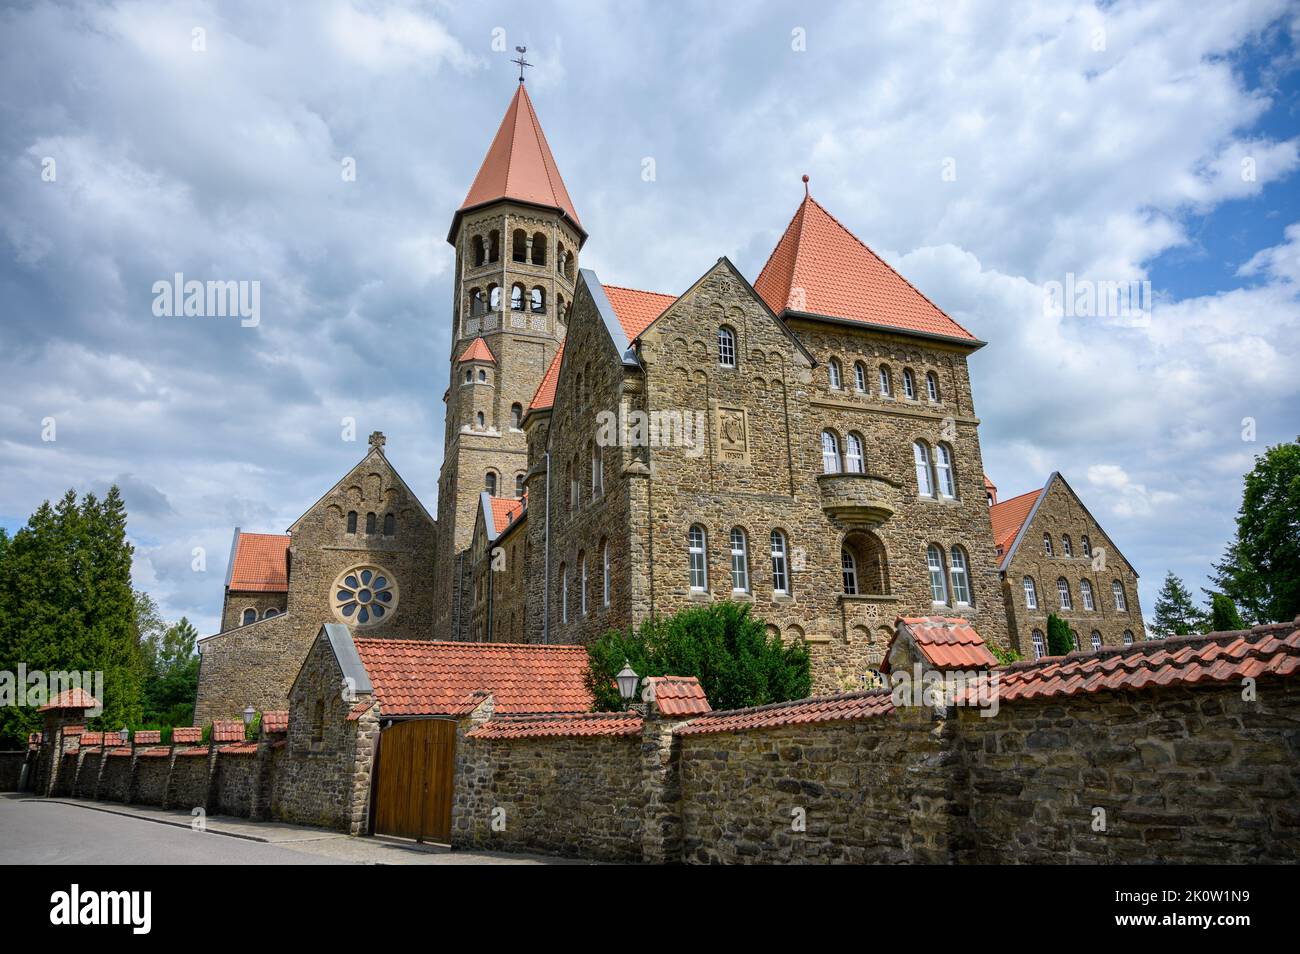 The Benedictine Abbey of St. Maurice and St. Maurus of Clervaux. Clervaux, Luxembourg. Stock Photo